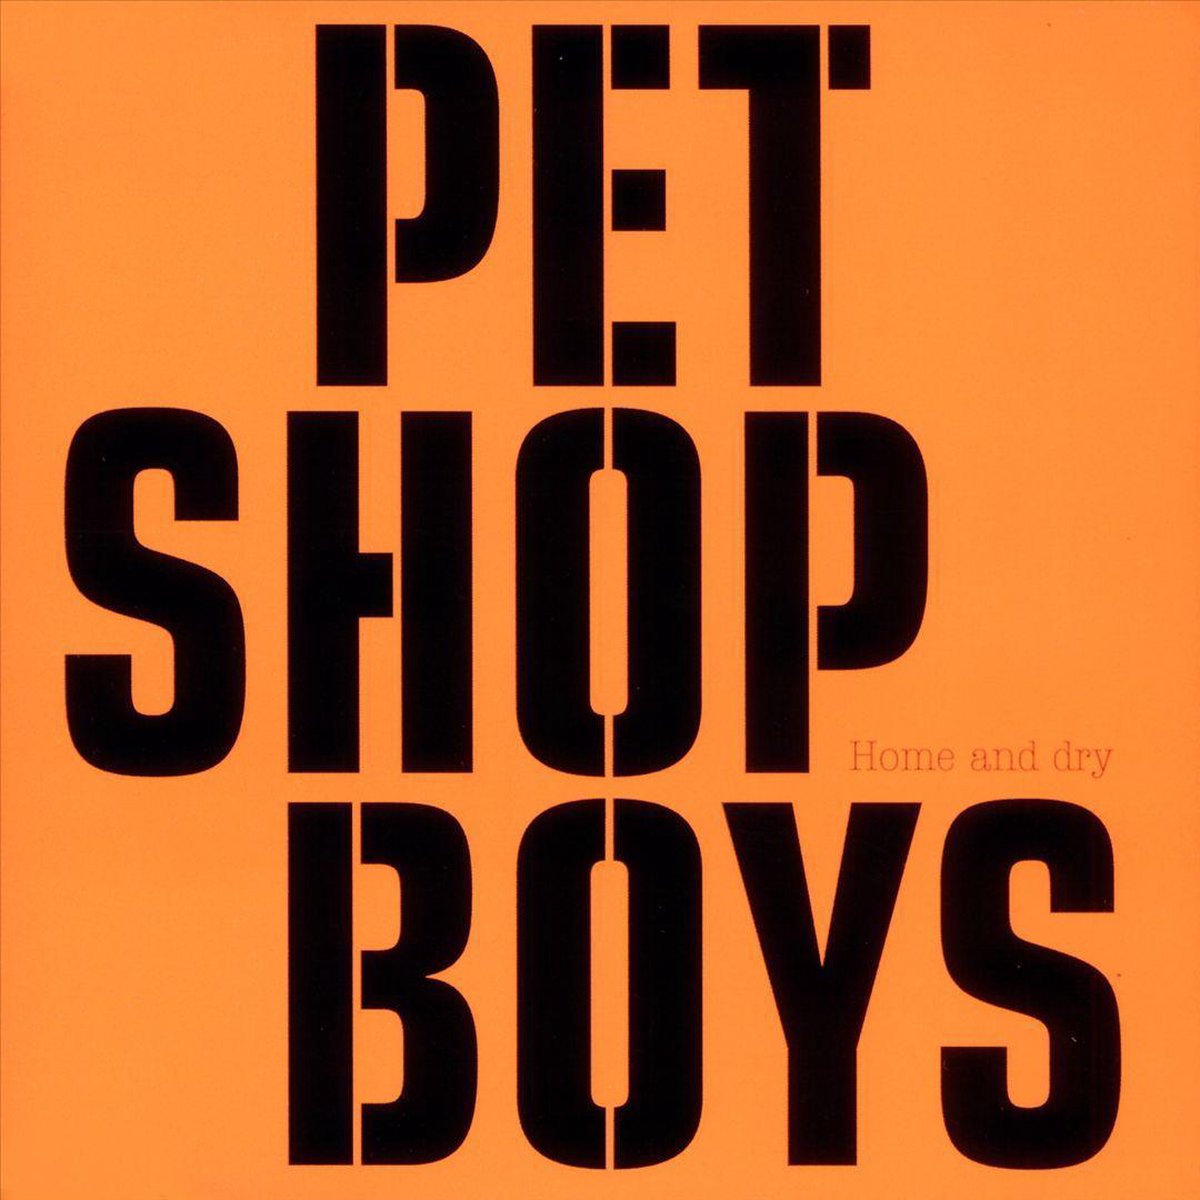 Home and Dry - Pet Shop Boys